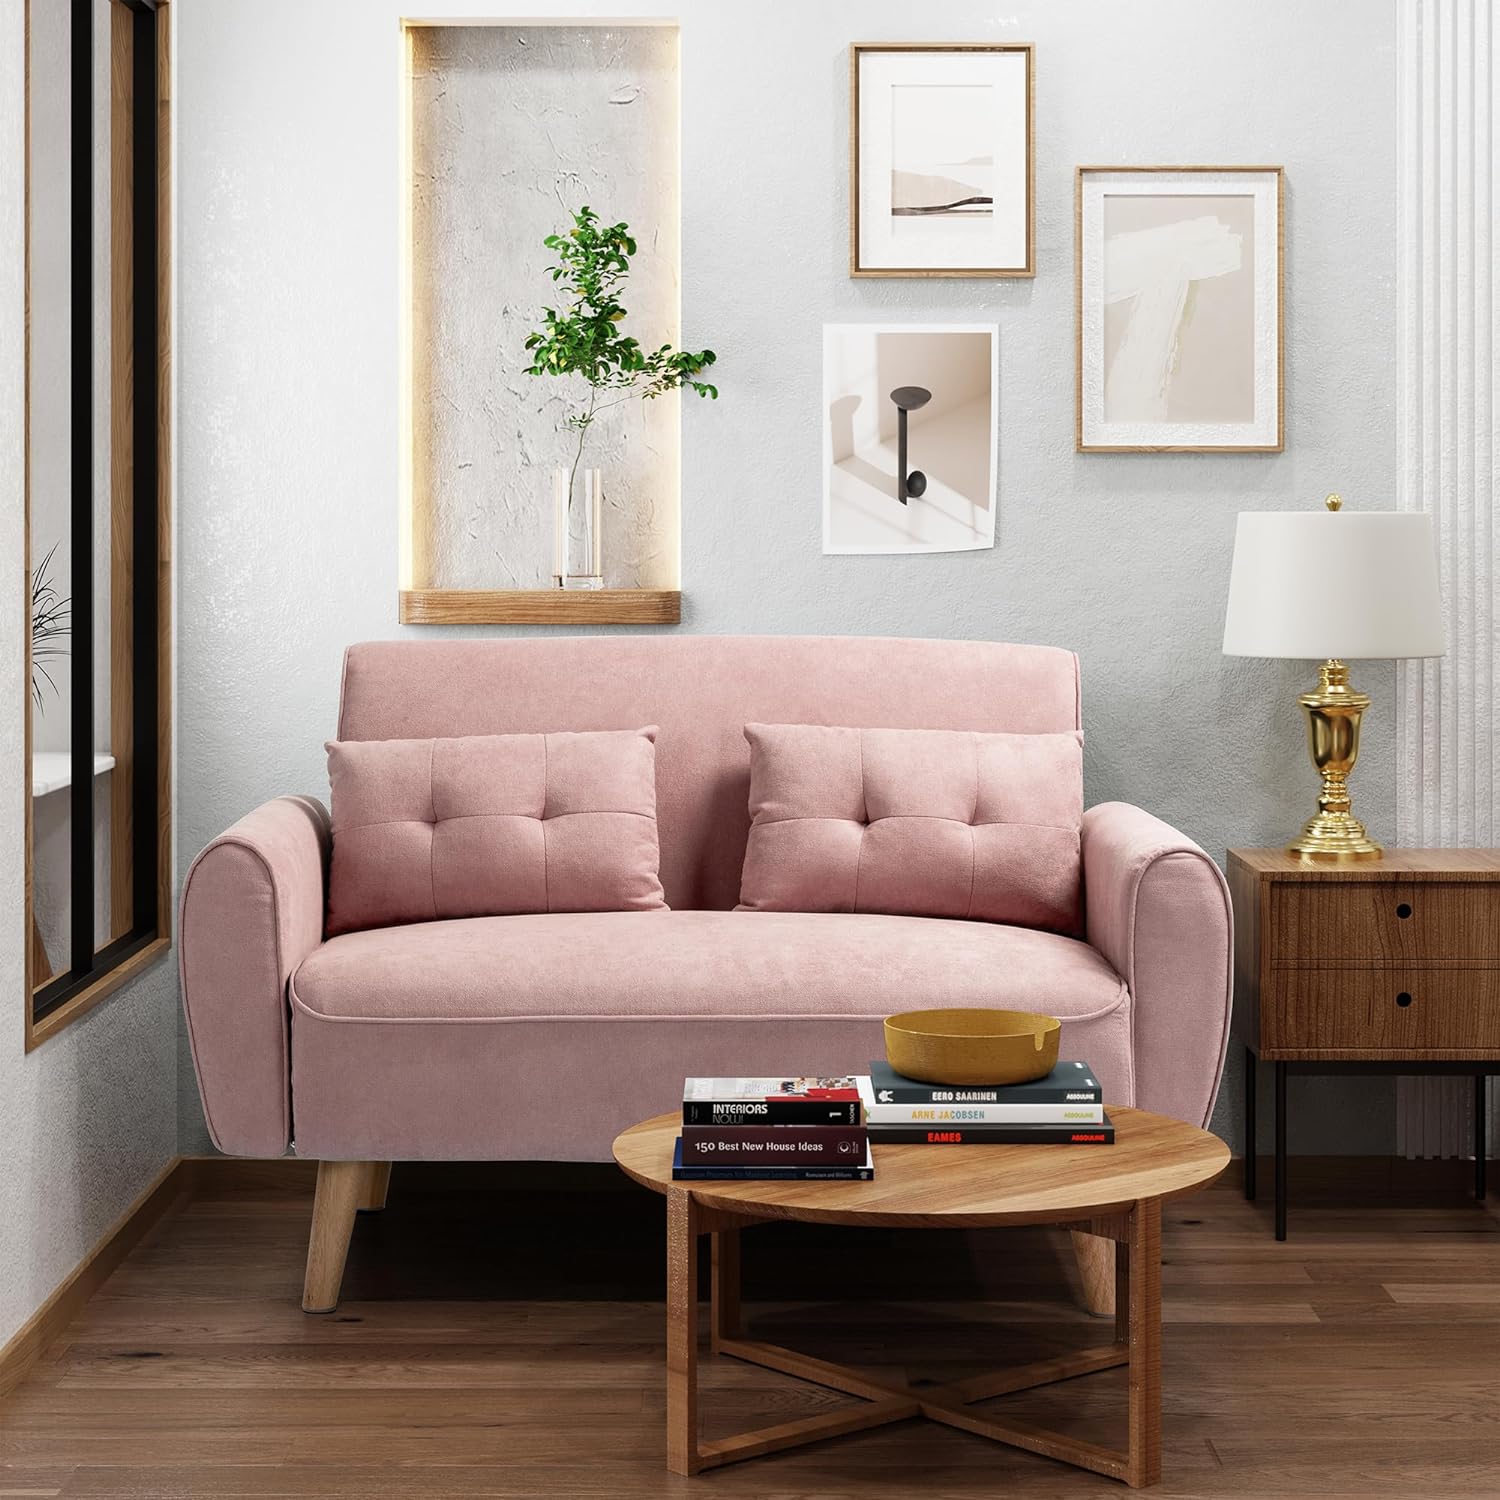 THIS IS A GREAT COUCH FOR A SMALL AREA. GREAT FOR A WALK IN CLOSET FOR CHANGING ETC. WOULD BUY AGAIN, LOTS OF GREAT COLORS OFFERED AS WELL. EASY TO ASSEMBLE, COMFORTABLE AS WELL.